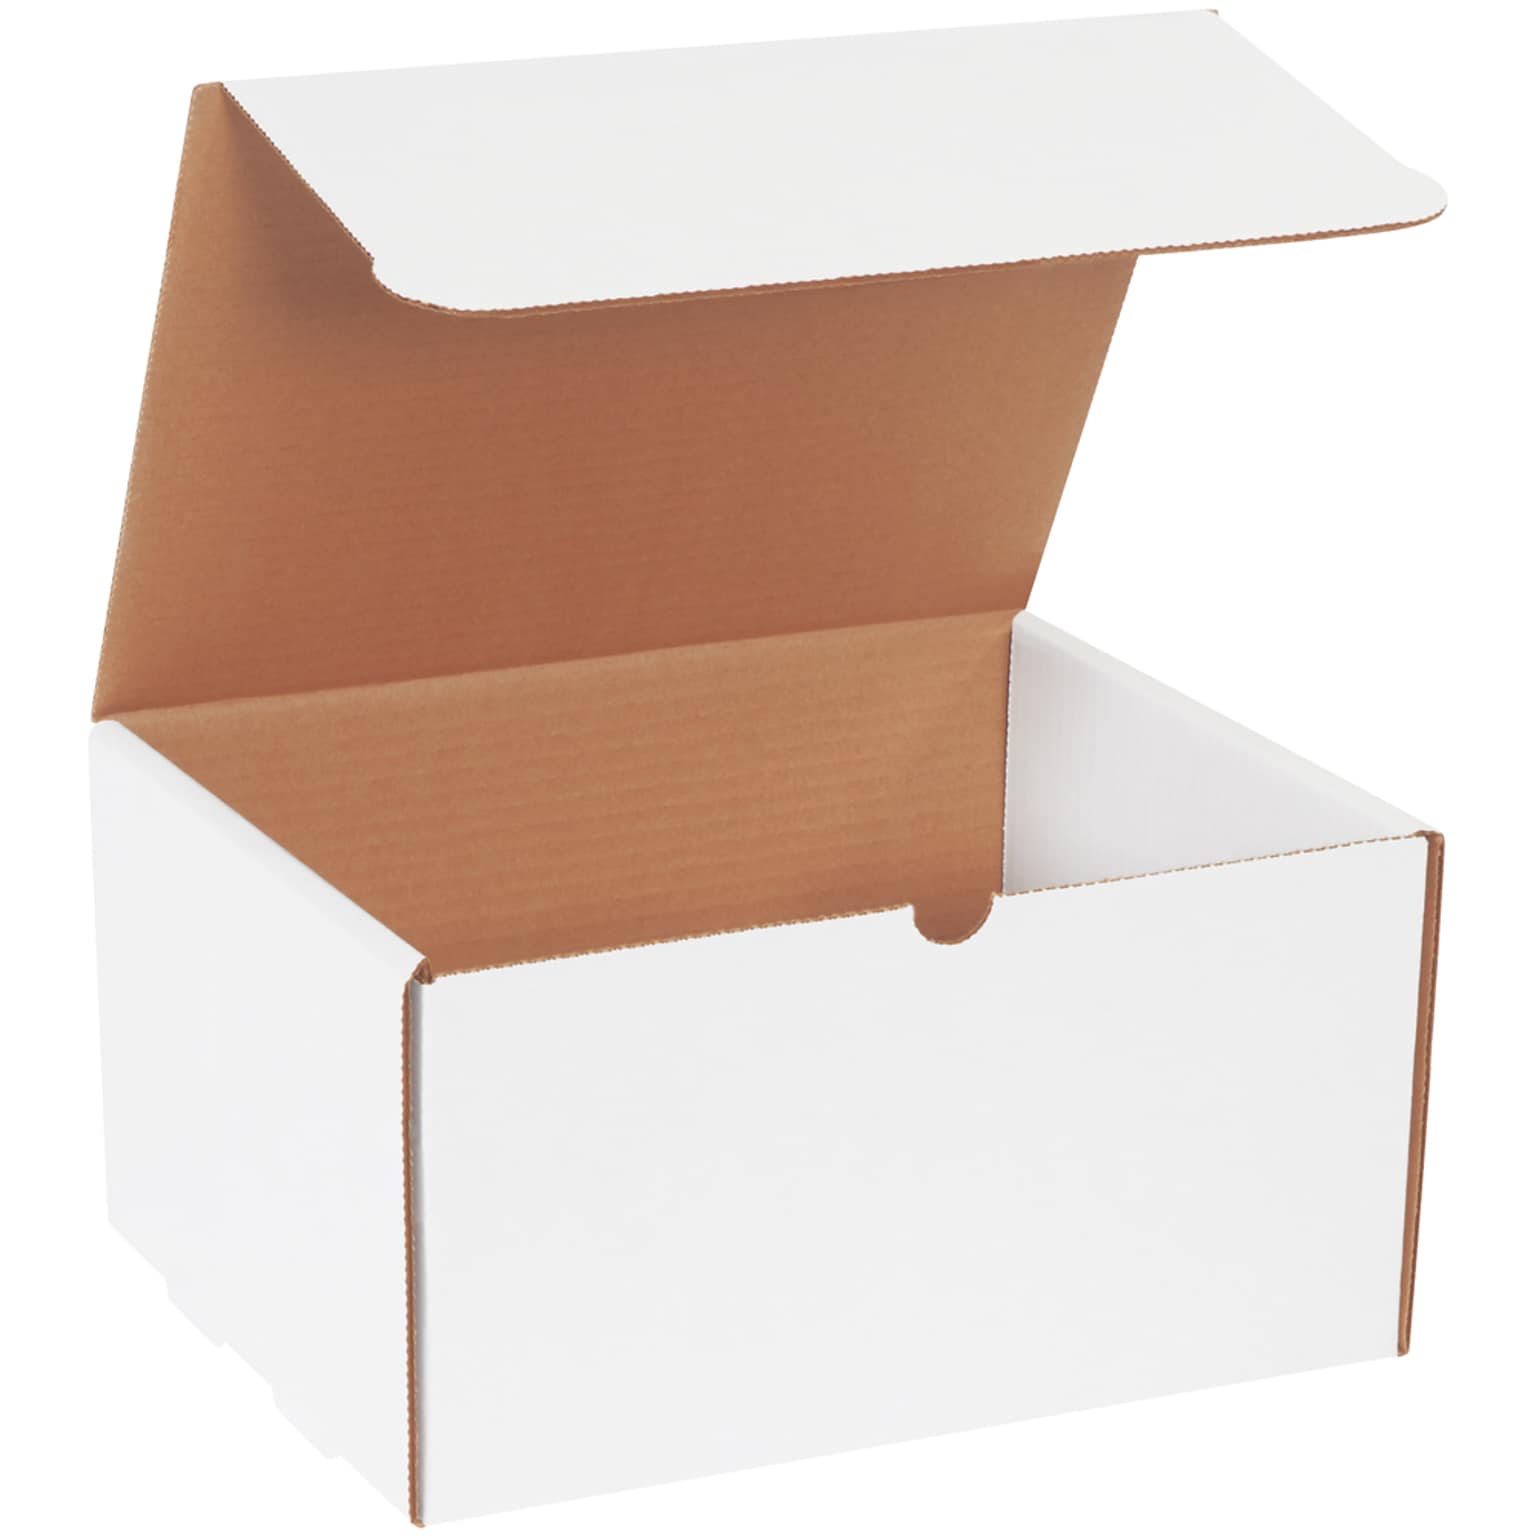 Quill Brand 11.125 x 8.75 x 6 Corrugated Shipping Boxes, 200#/ECT-32-B Mullen Rated  Pack of 50, (M1186)